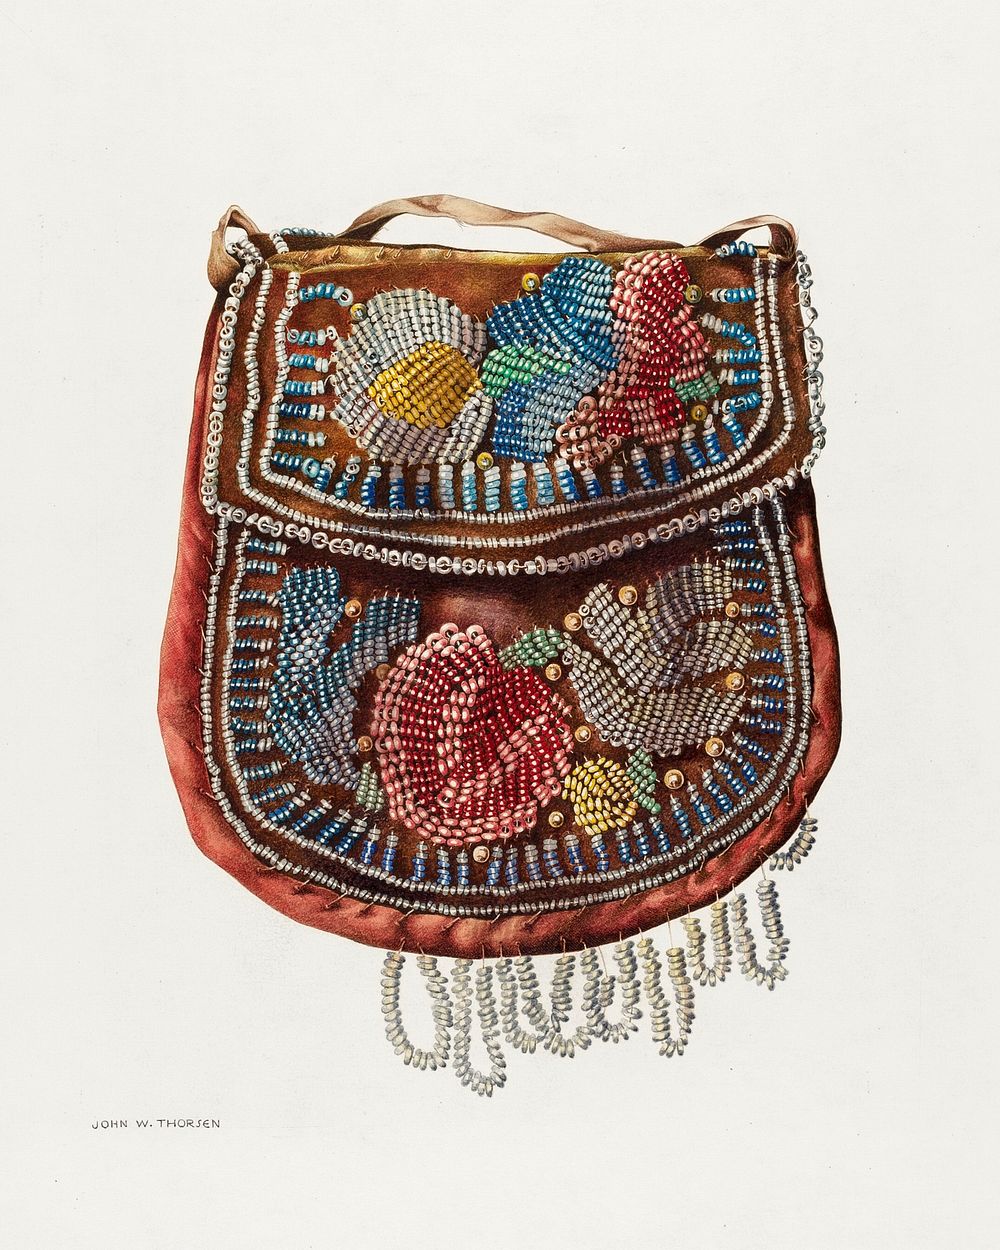 Bag (ca. 1941) by John Thorsen. Original from The National Gallery of Art. Digitally enhanced by rawpixel.